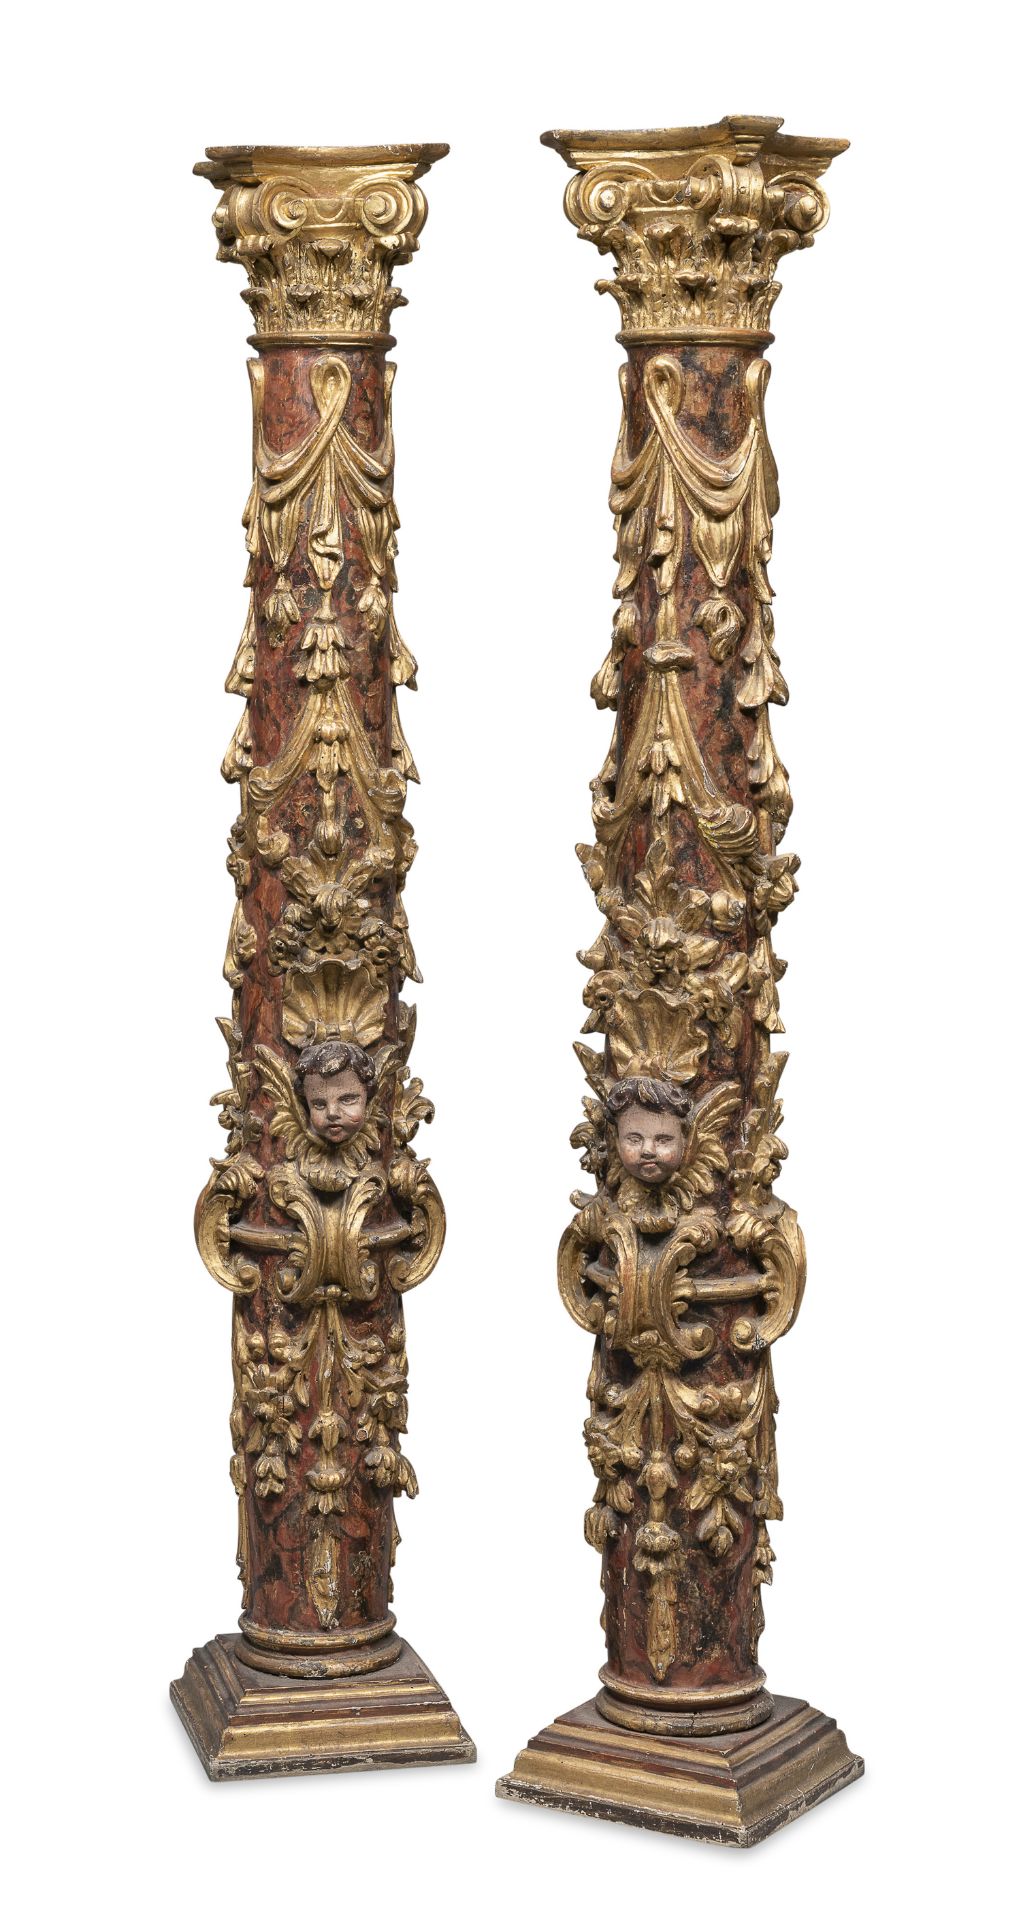 WONDERFUL PAIR OF CARVED WOOD COLUMNS NORTHERN ITALY 18TH CENTURY